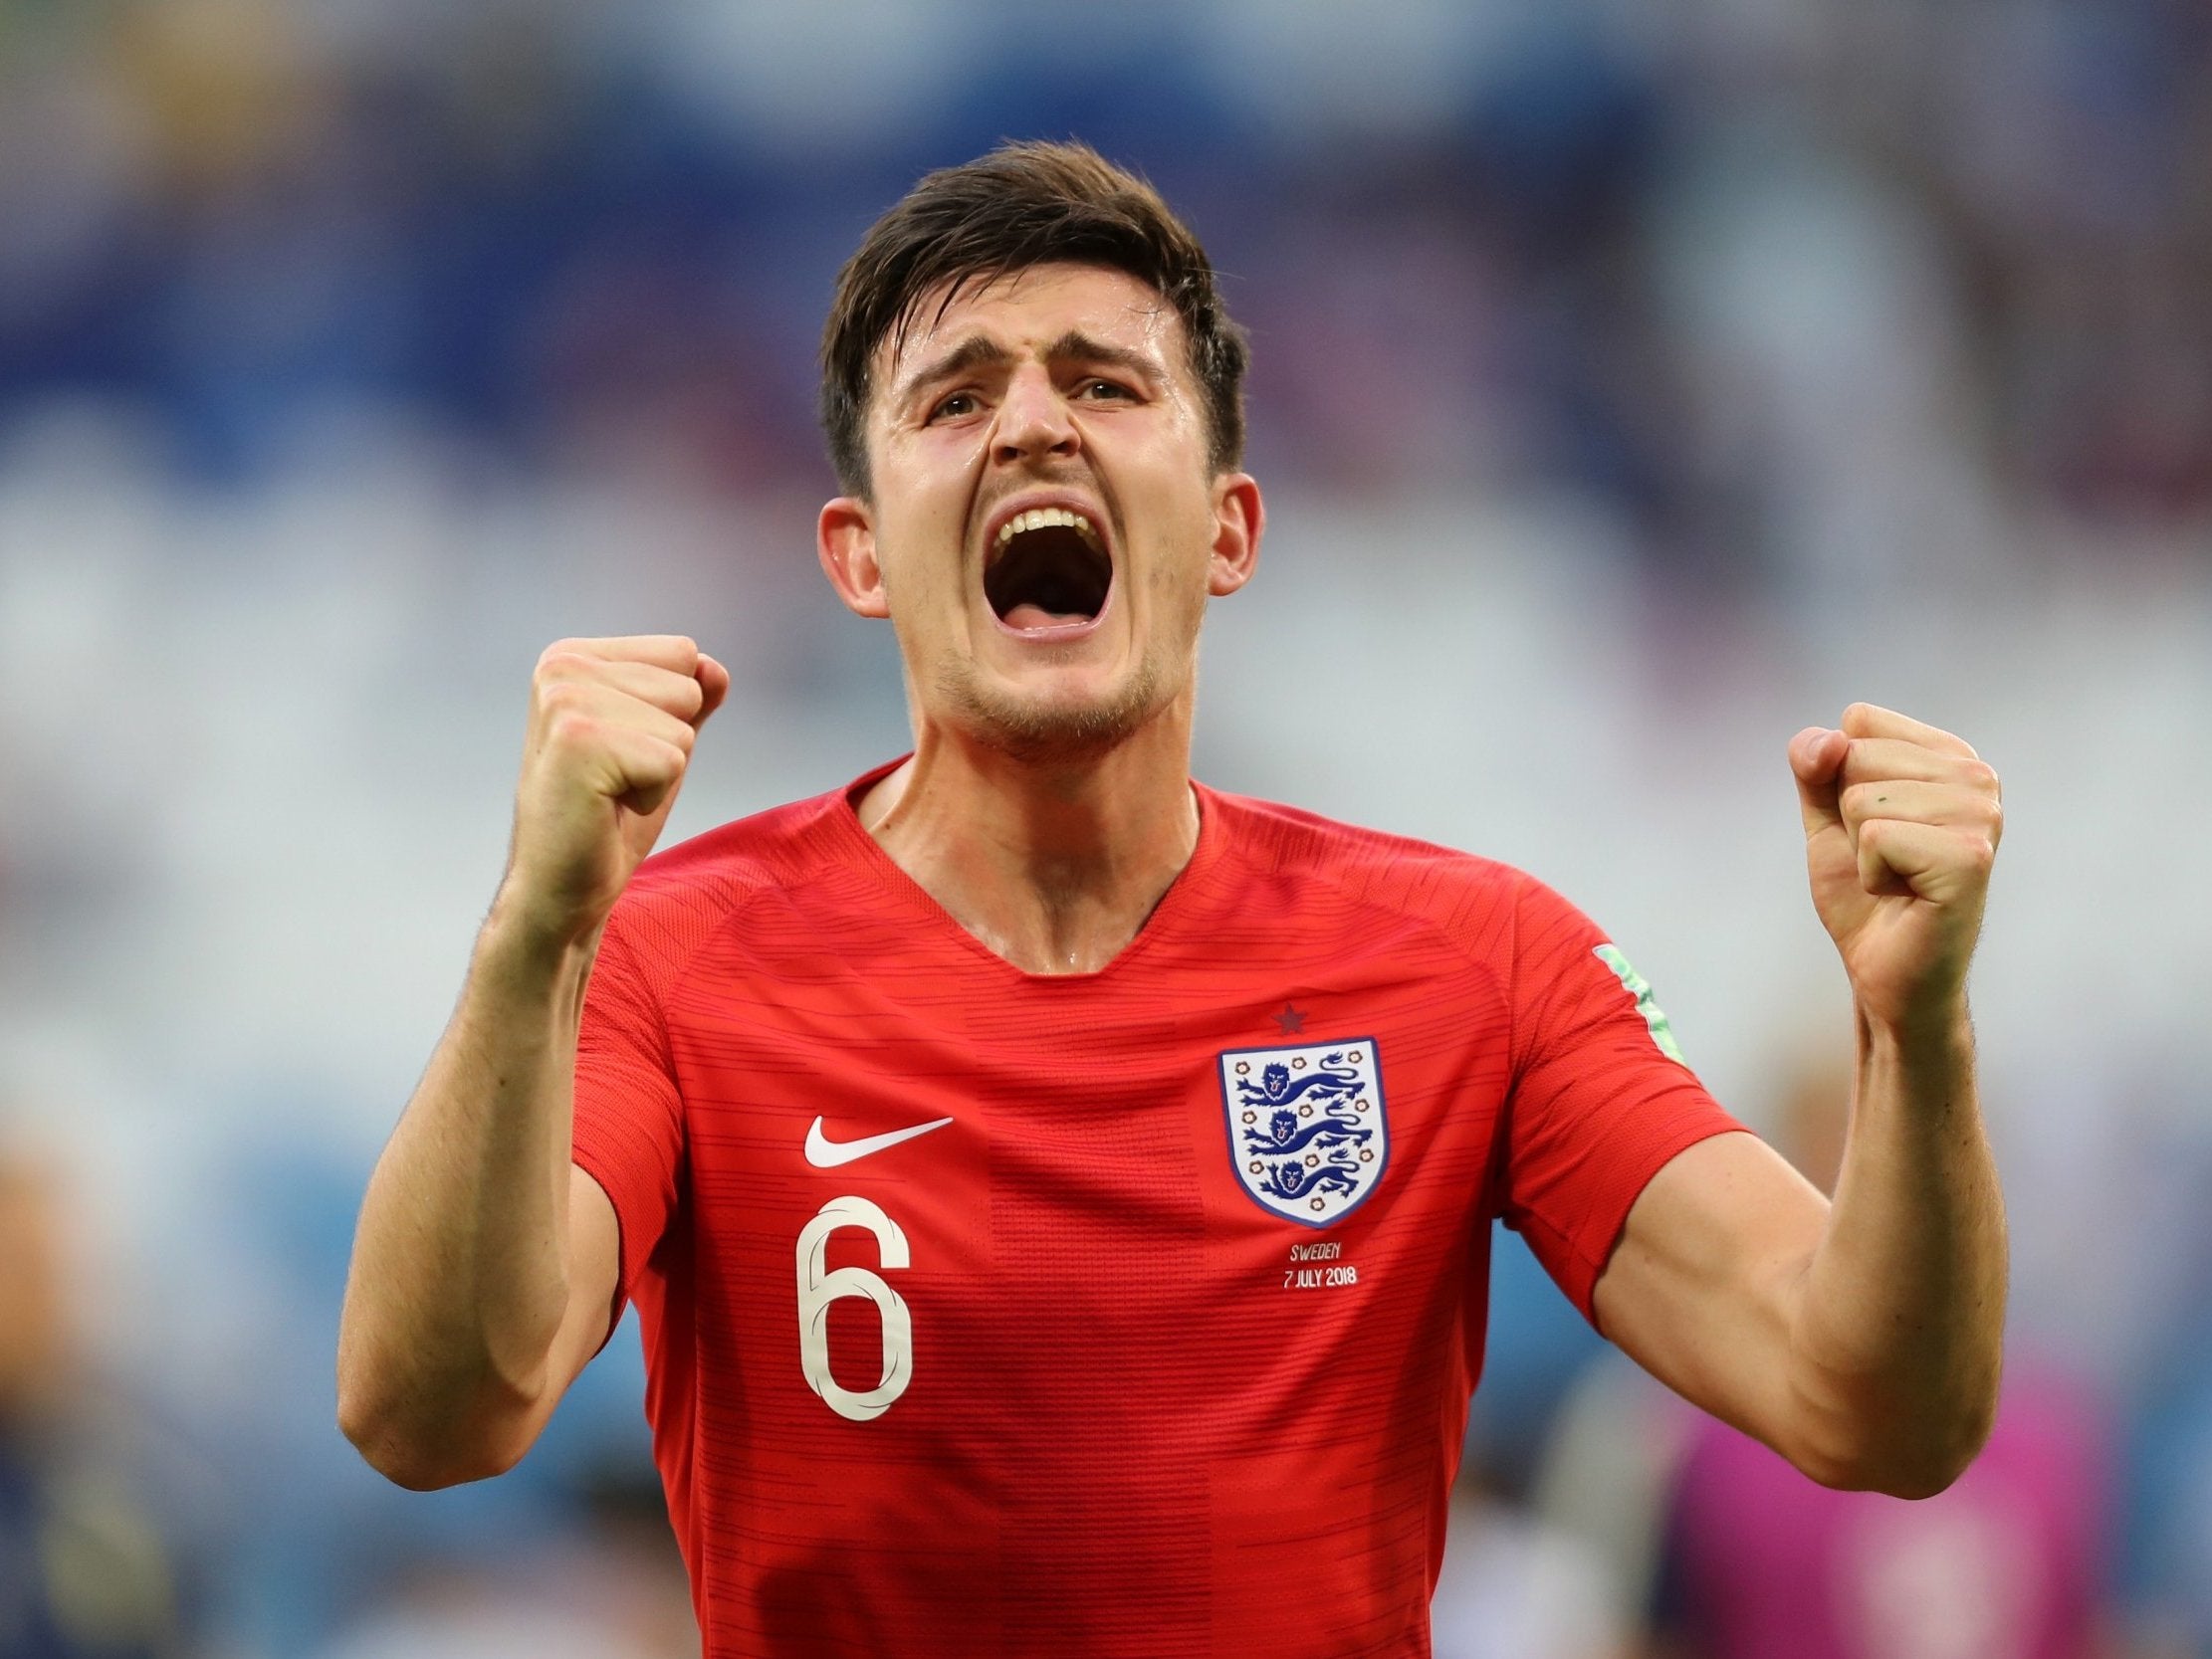 Transfer news, rumours - LIVE: Manchester United chase Harry Maguire, Paul Pogba to Barcelona, Arsenal bid for Domagoj Vida plus Chelsea, Spurs, Liverpool and latest Deadline Day deals